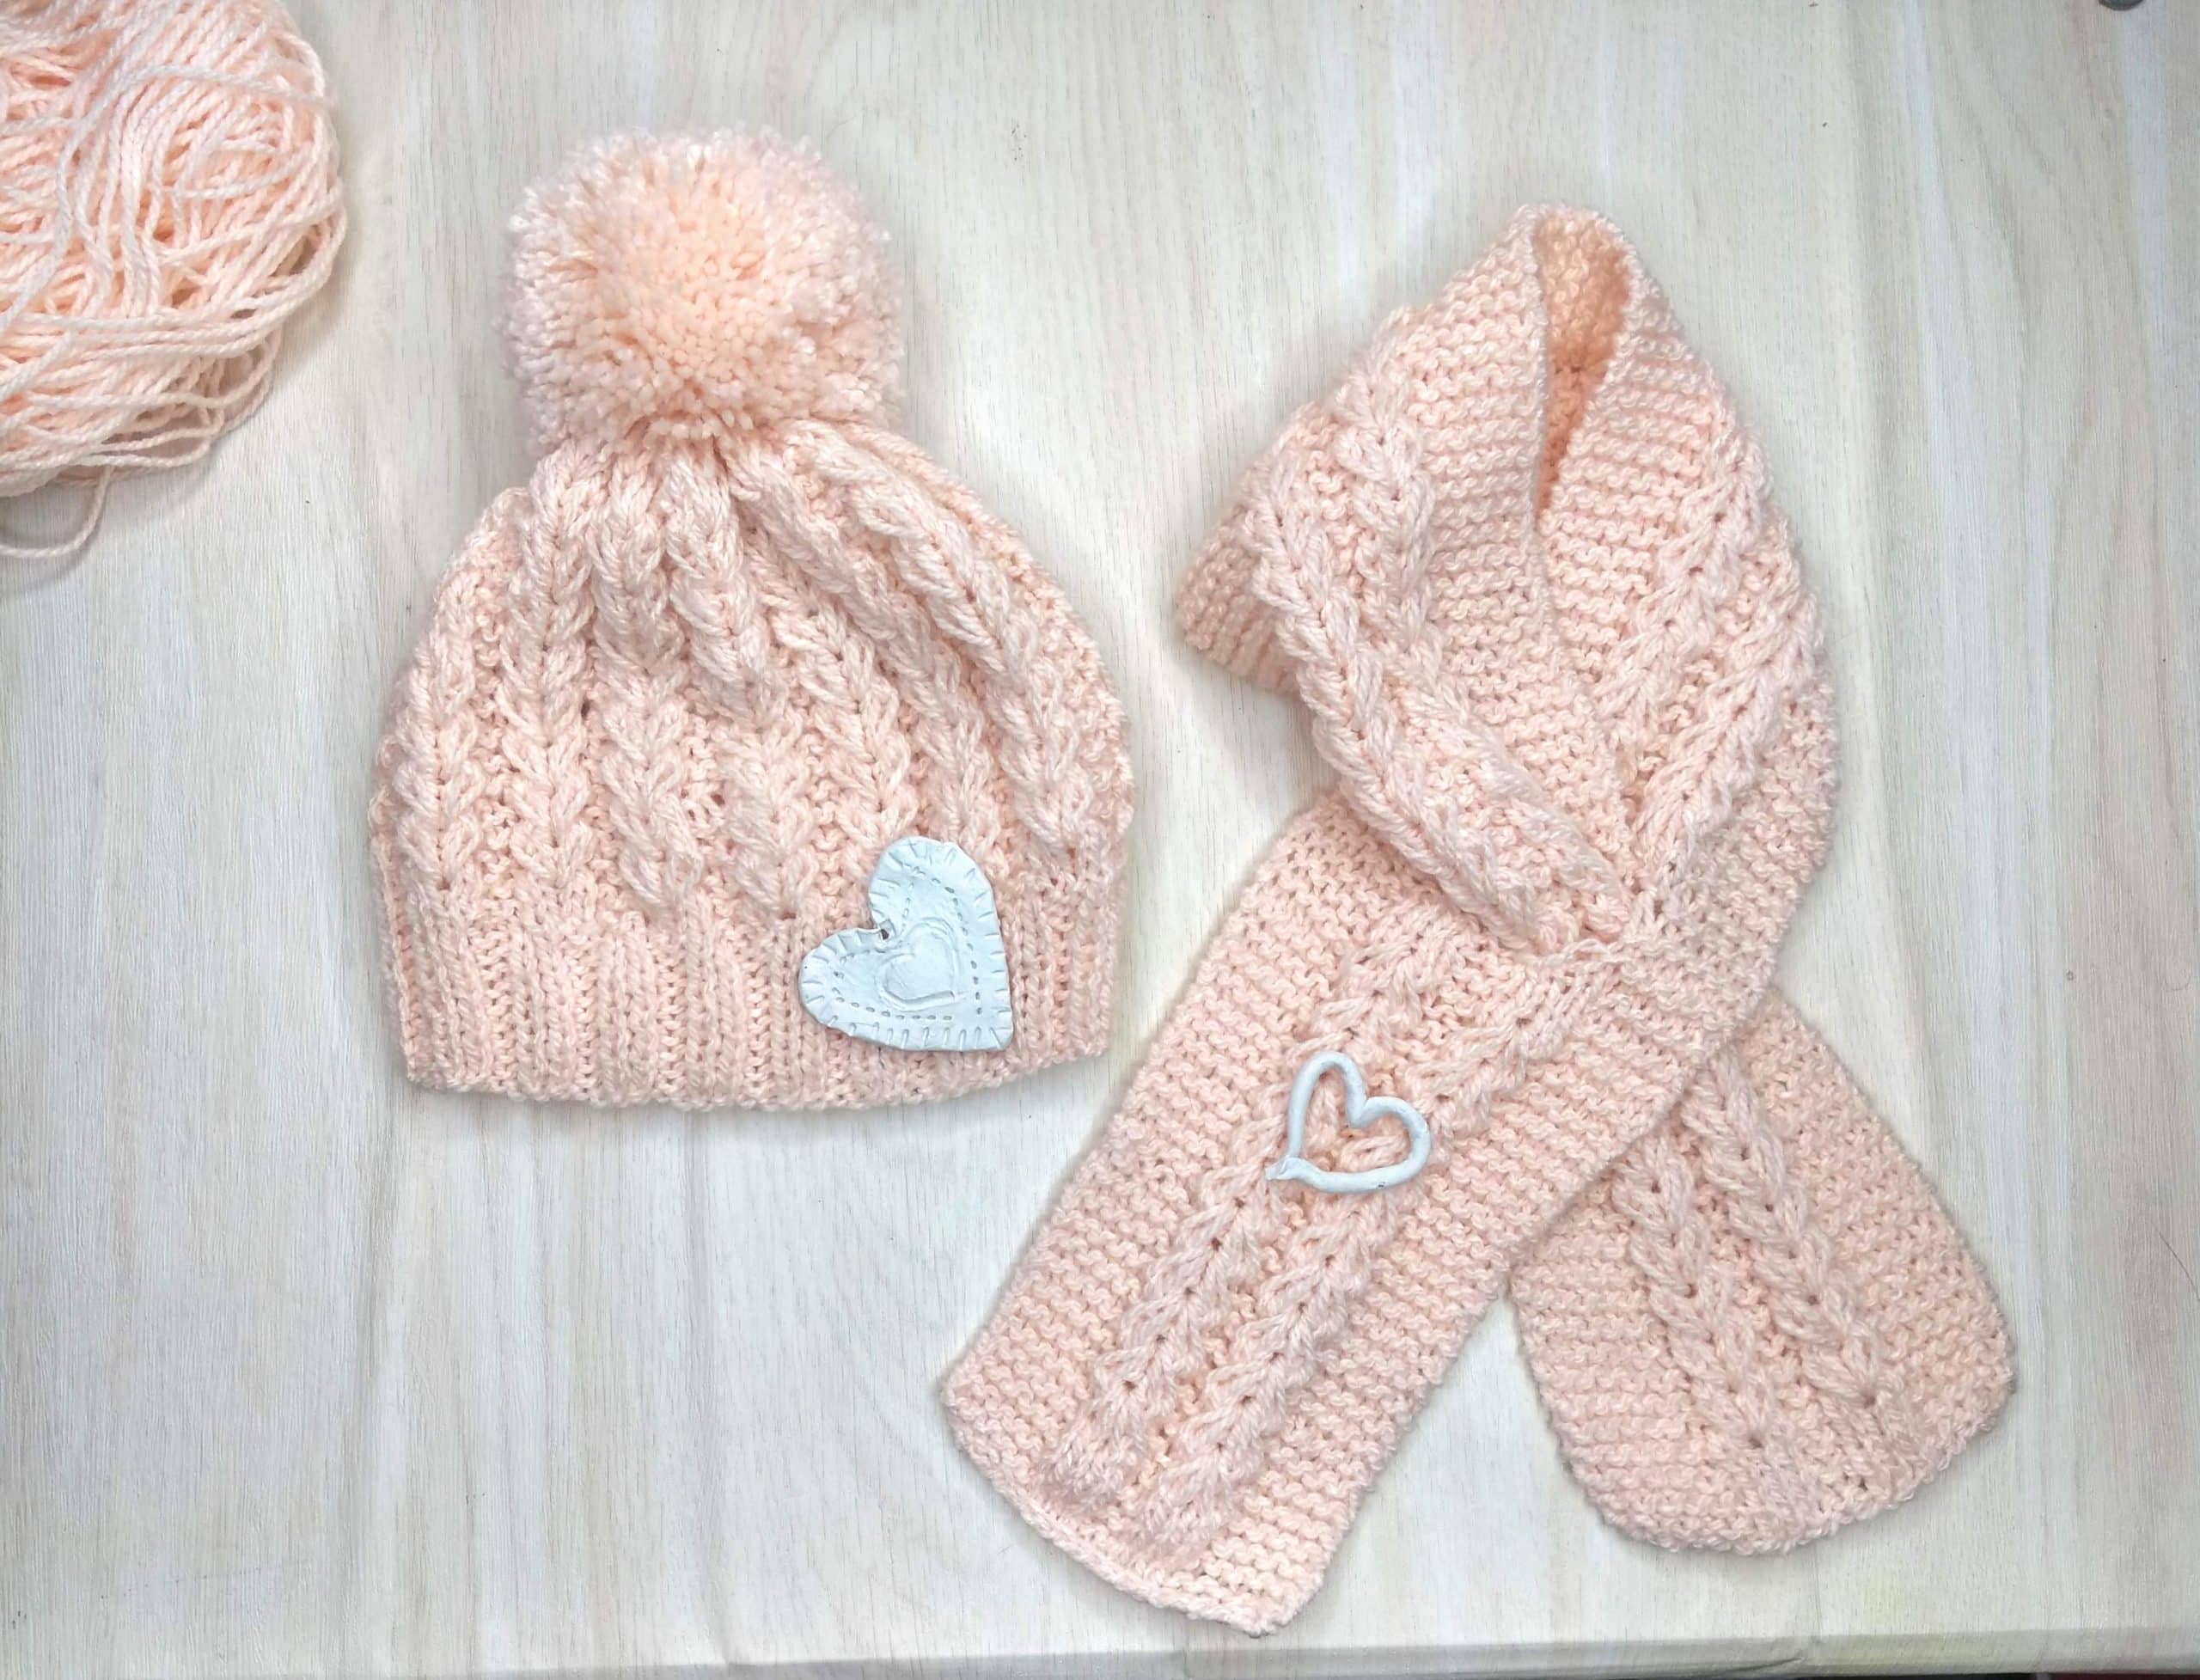 Easy Crochet Beanie and Scarf  Easy Crochet kid hat and scarf set